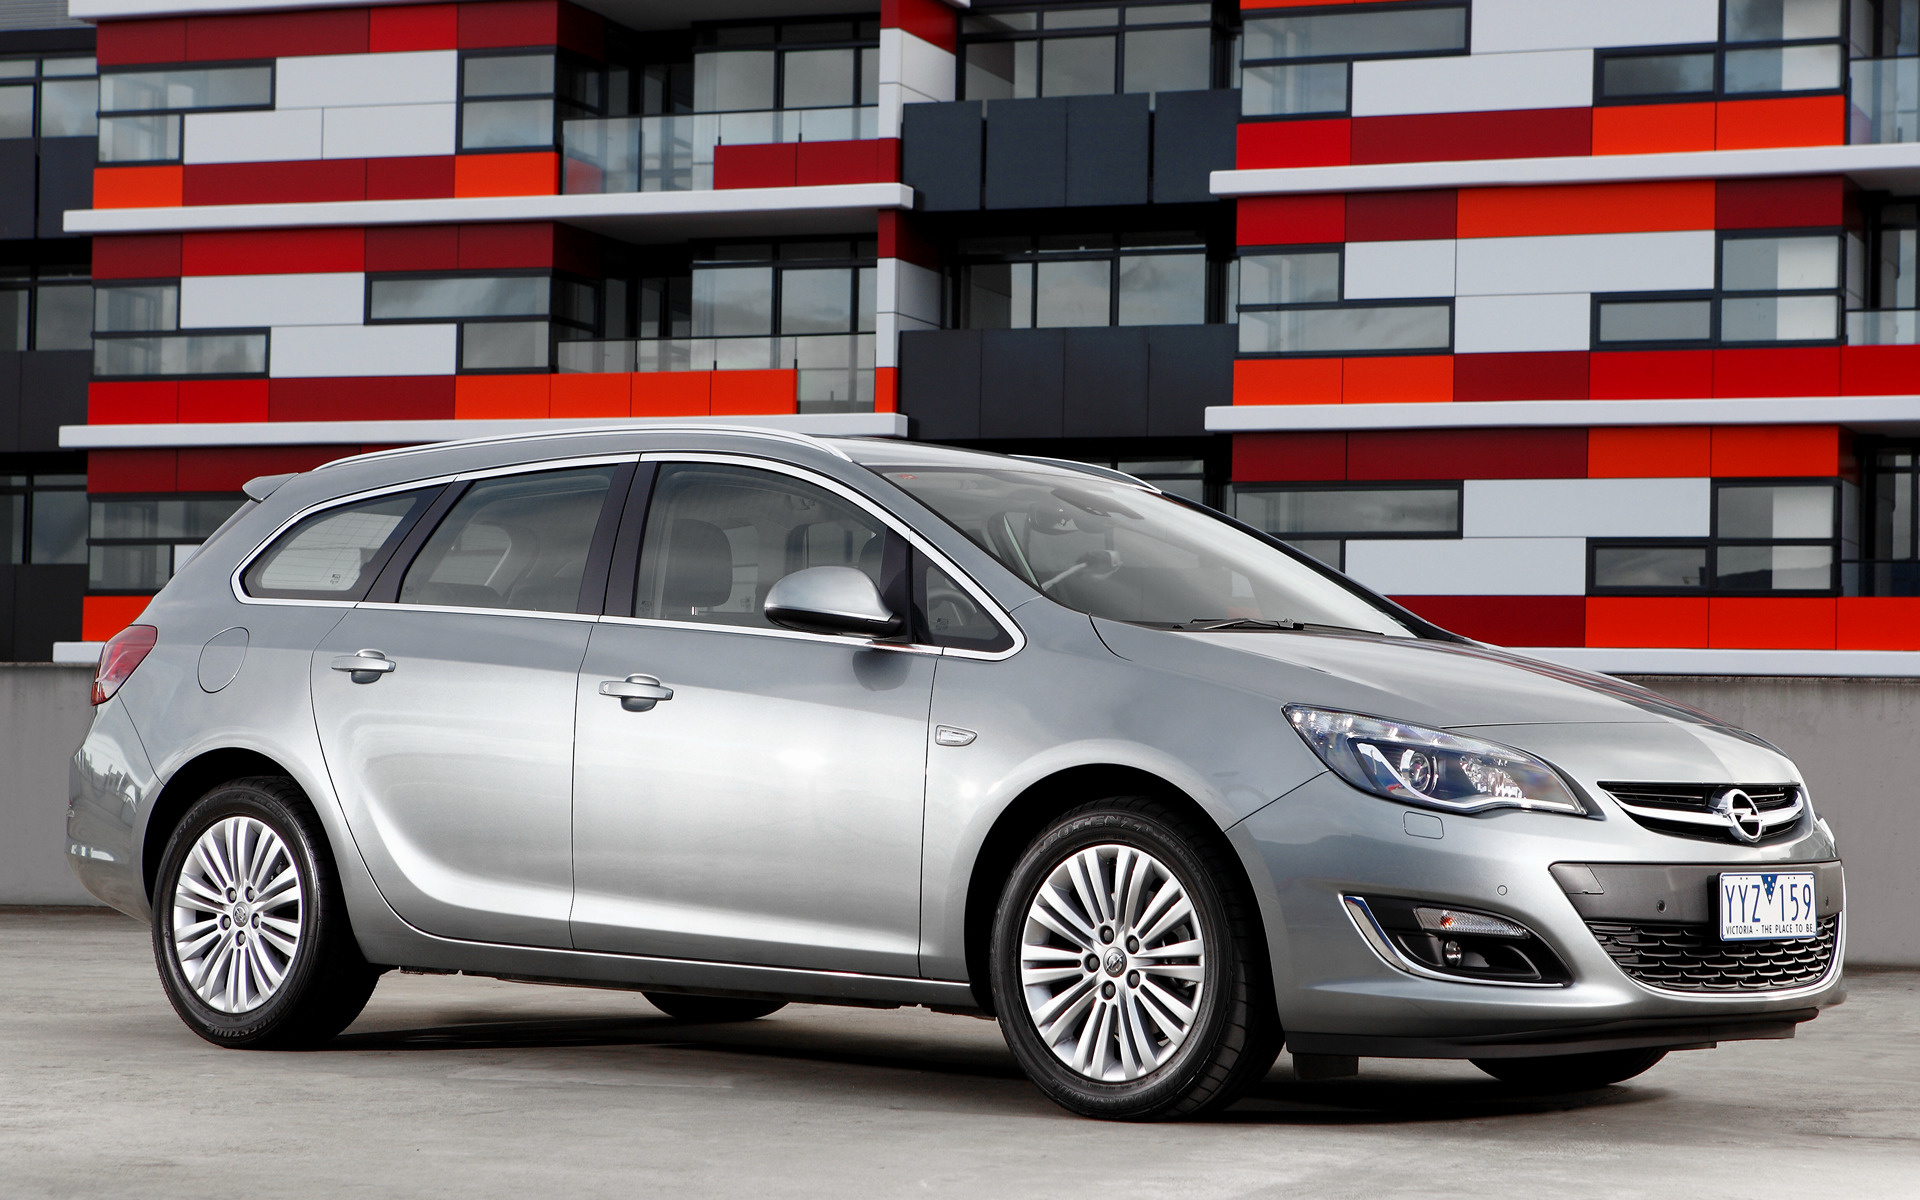 uitlaat betaling Maan 2012 Opel Astra Sports Tourer (AU) - Wallpapers and HD Images | Car Pixel